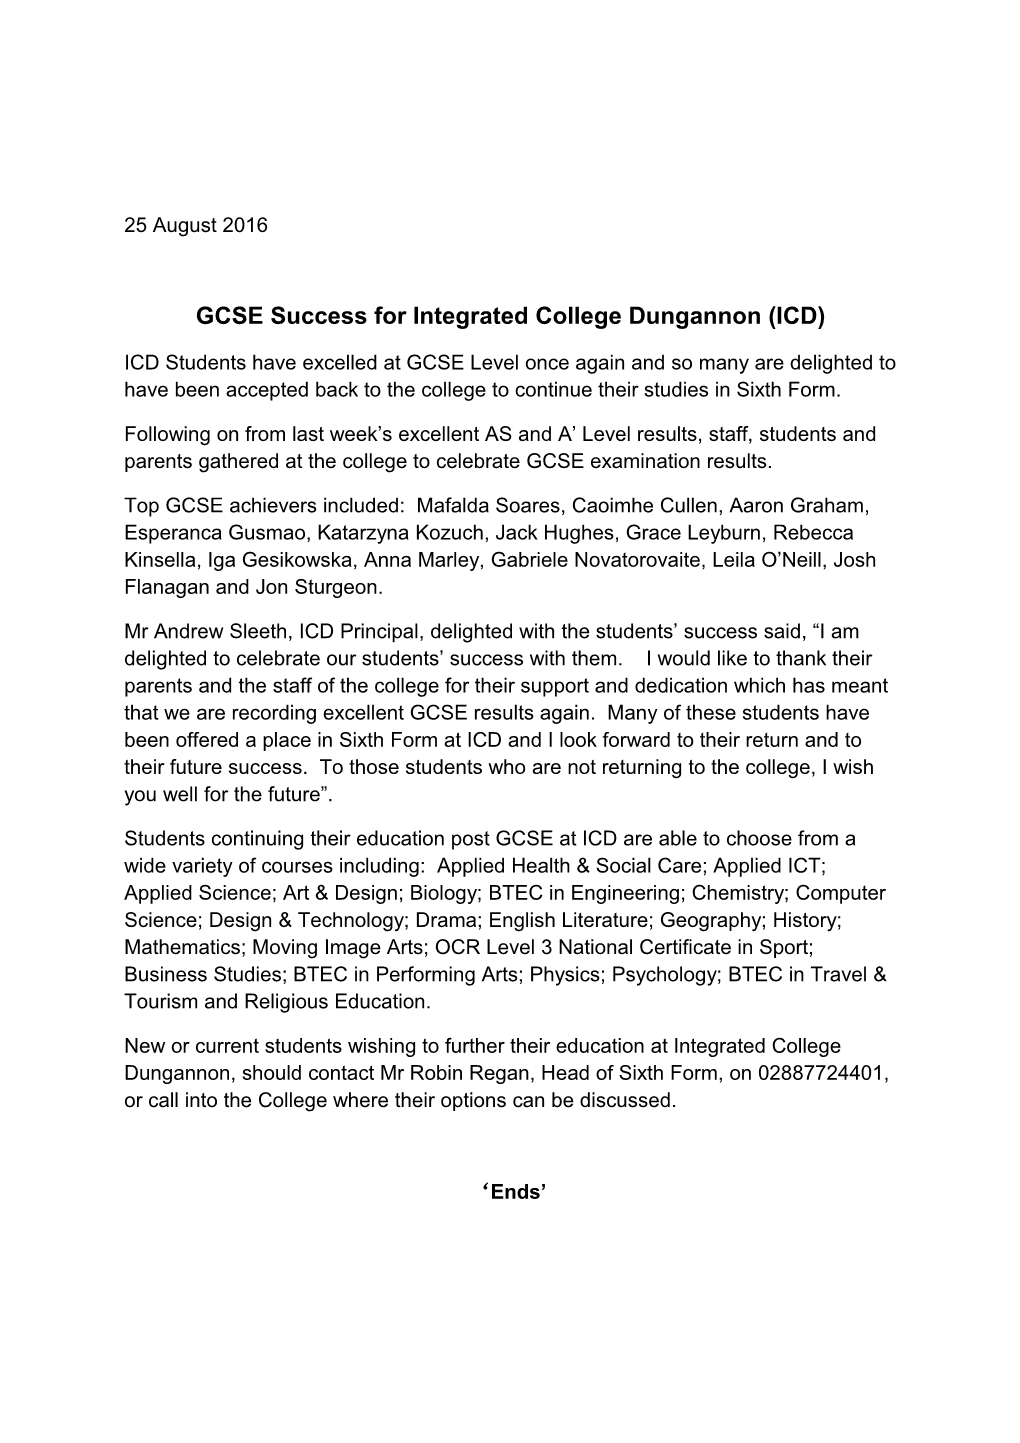 GCSE Success for Integrated College Dungannon (ICD)